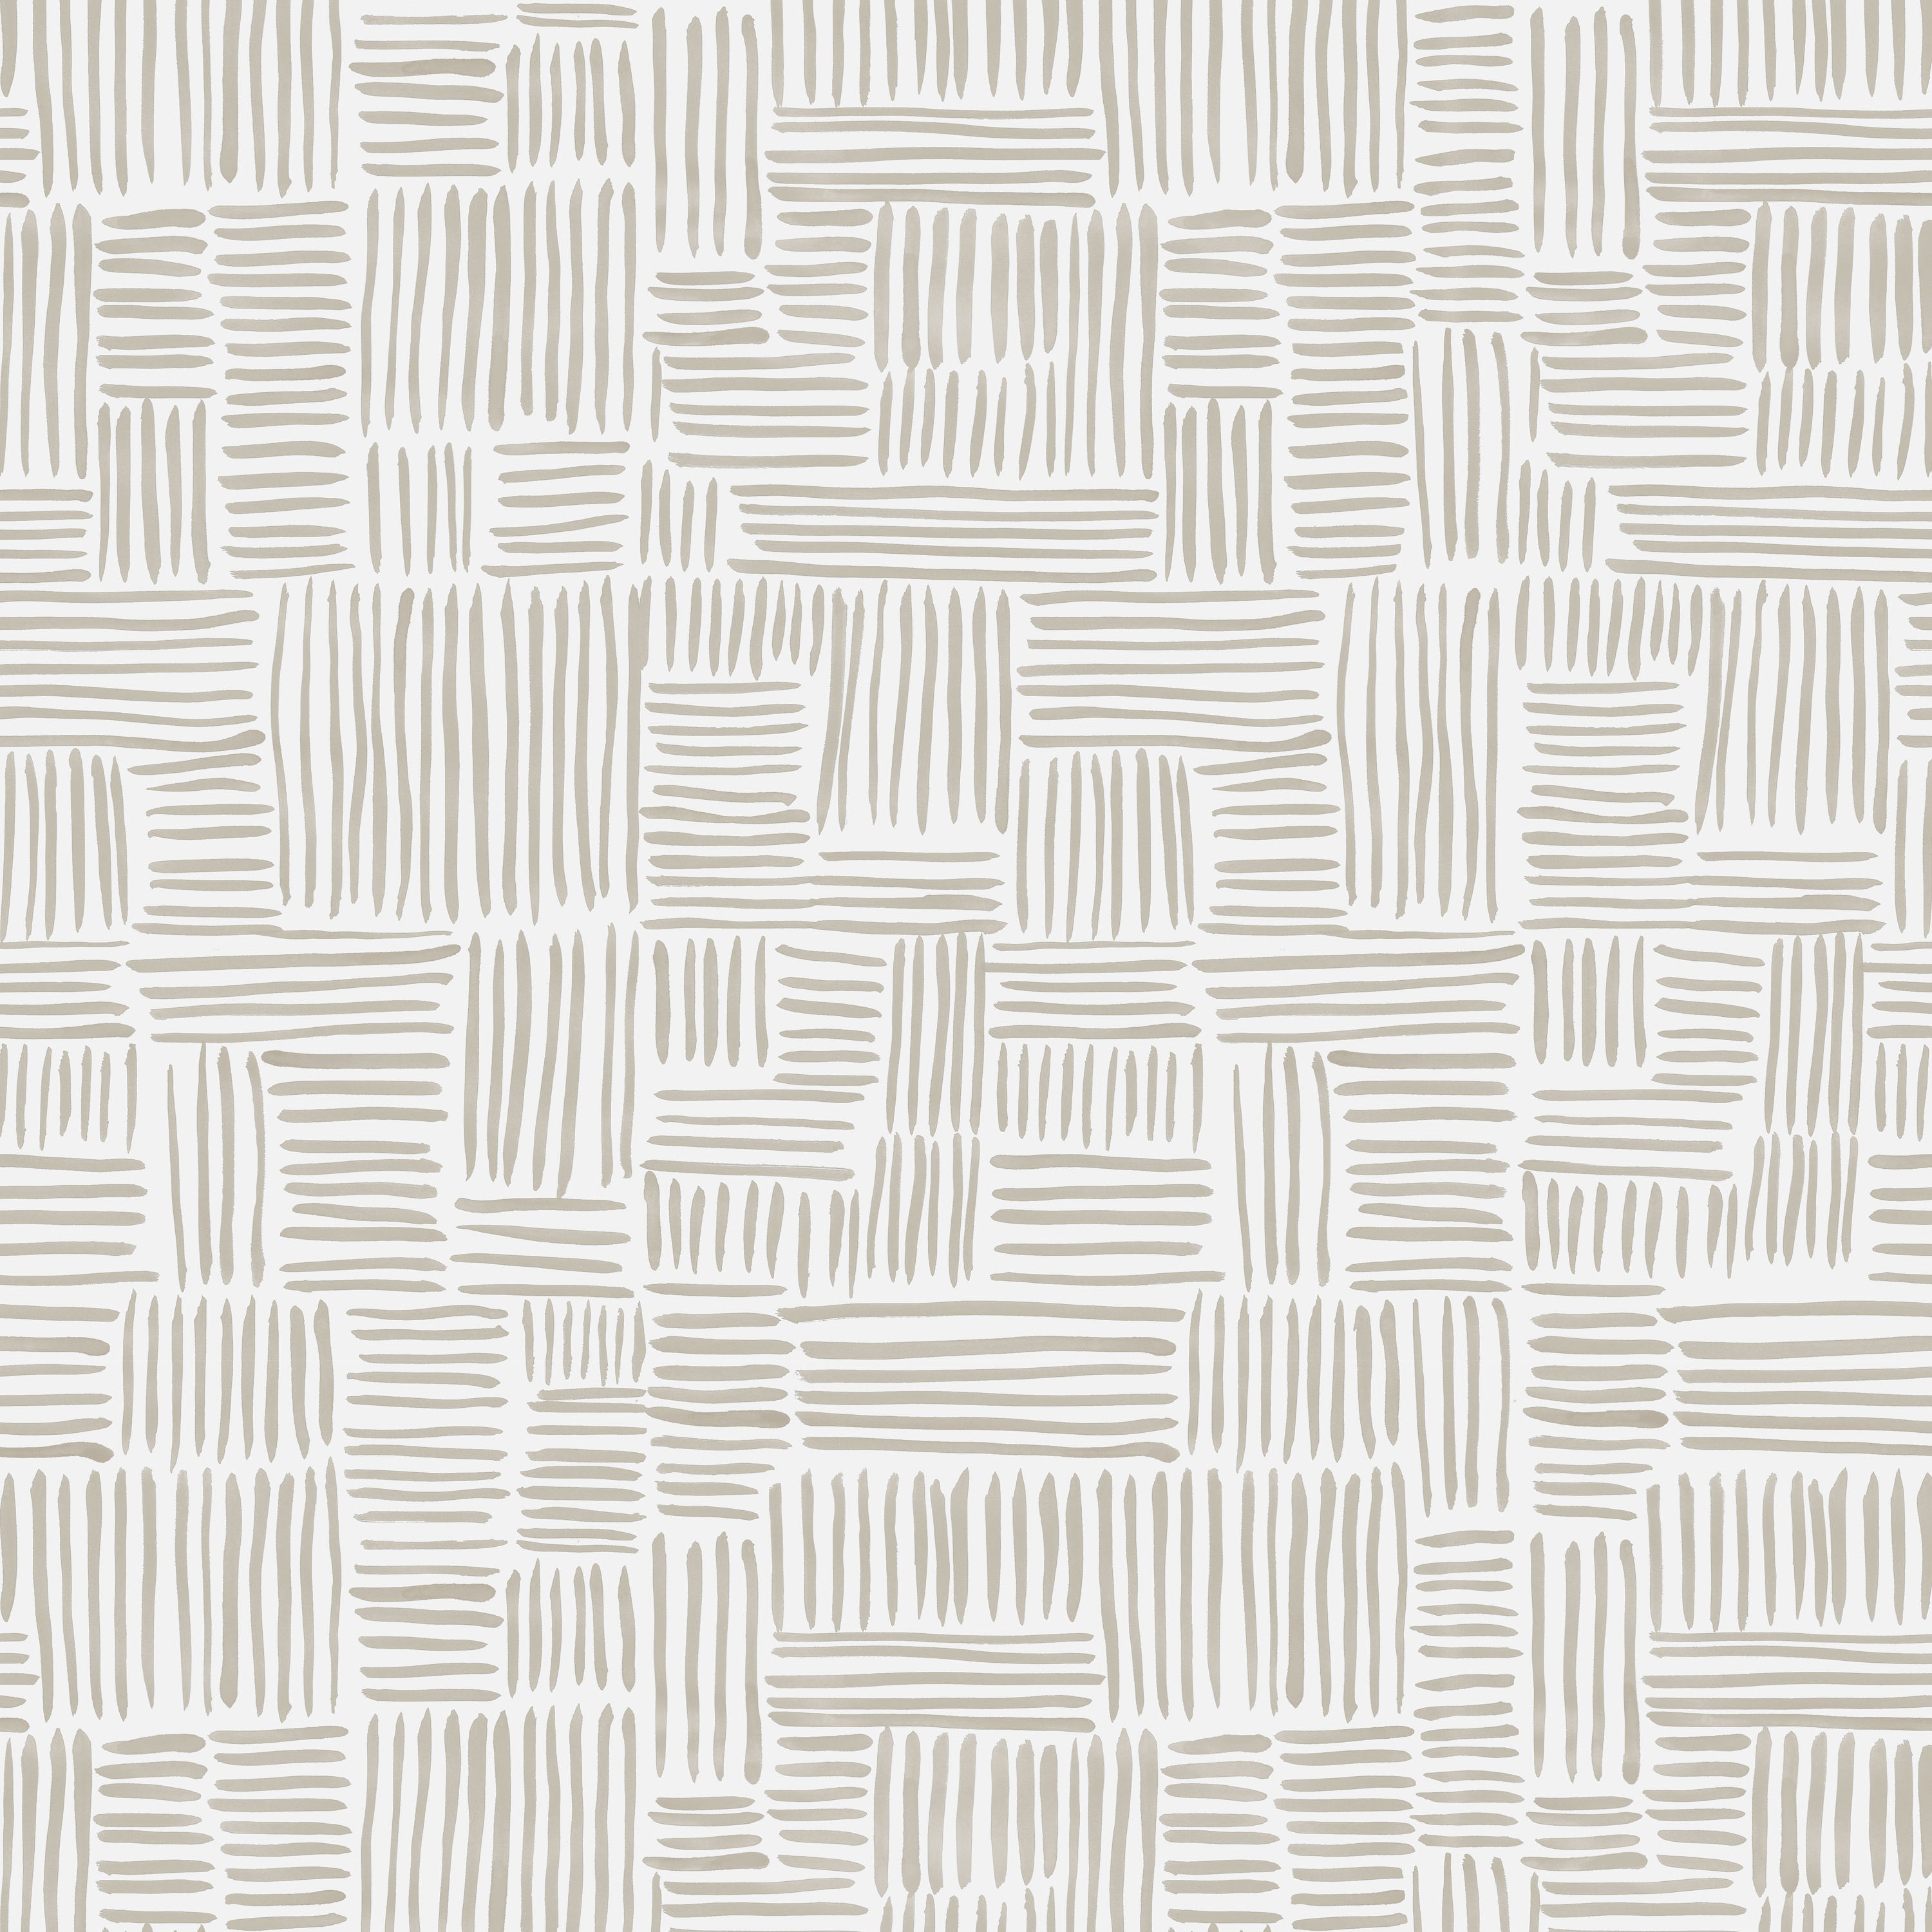 Detail of wallpaper in a directional dash pattern in cream on a white field.